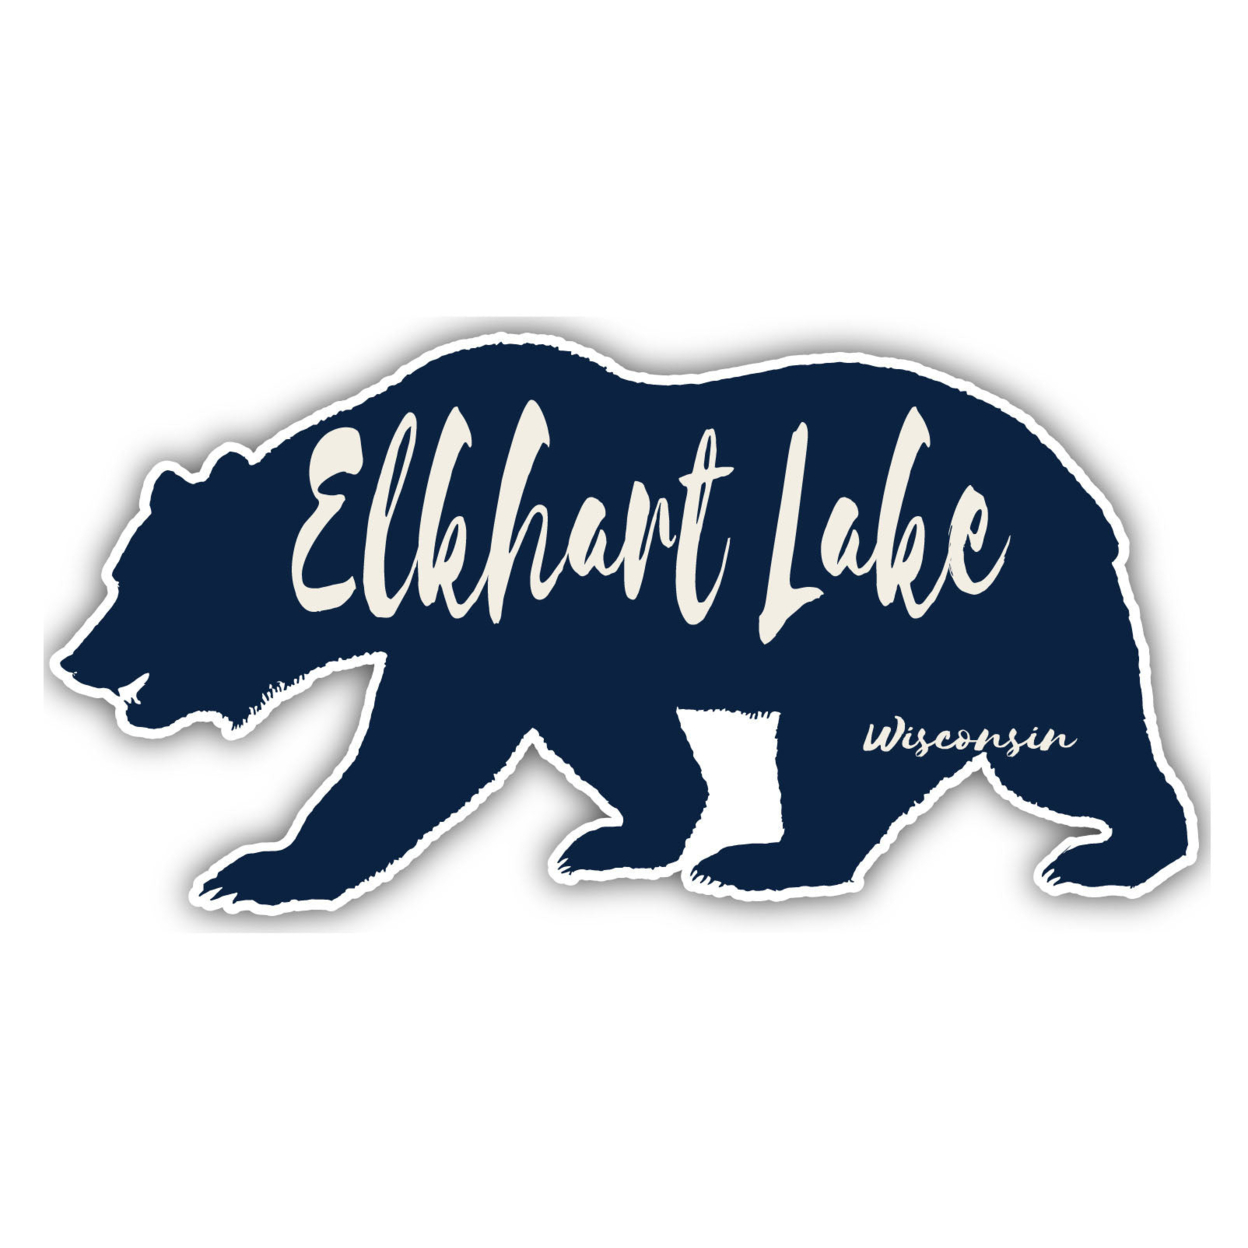 Elkhart Lake Wisconsin Souvenir Decorative Stickers (Choose Theme And Size) - 4-Pack, 6-Inch, Bear